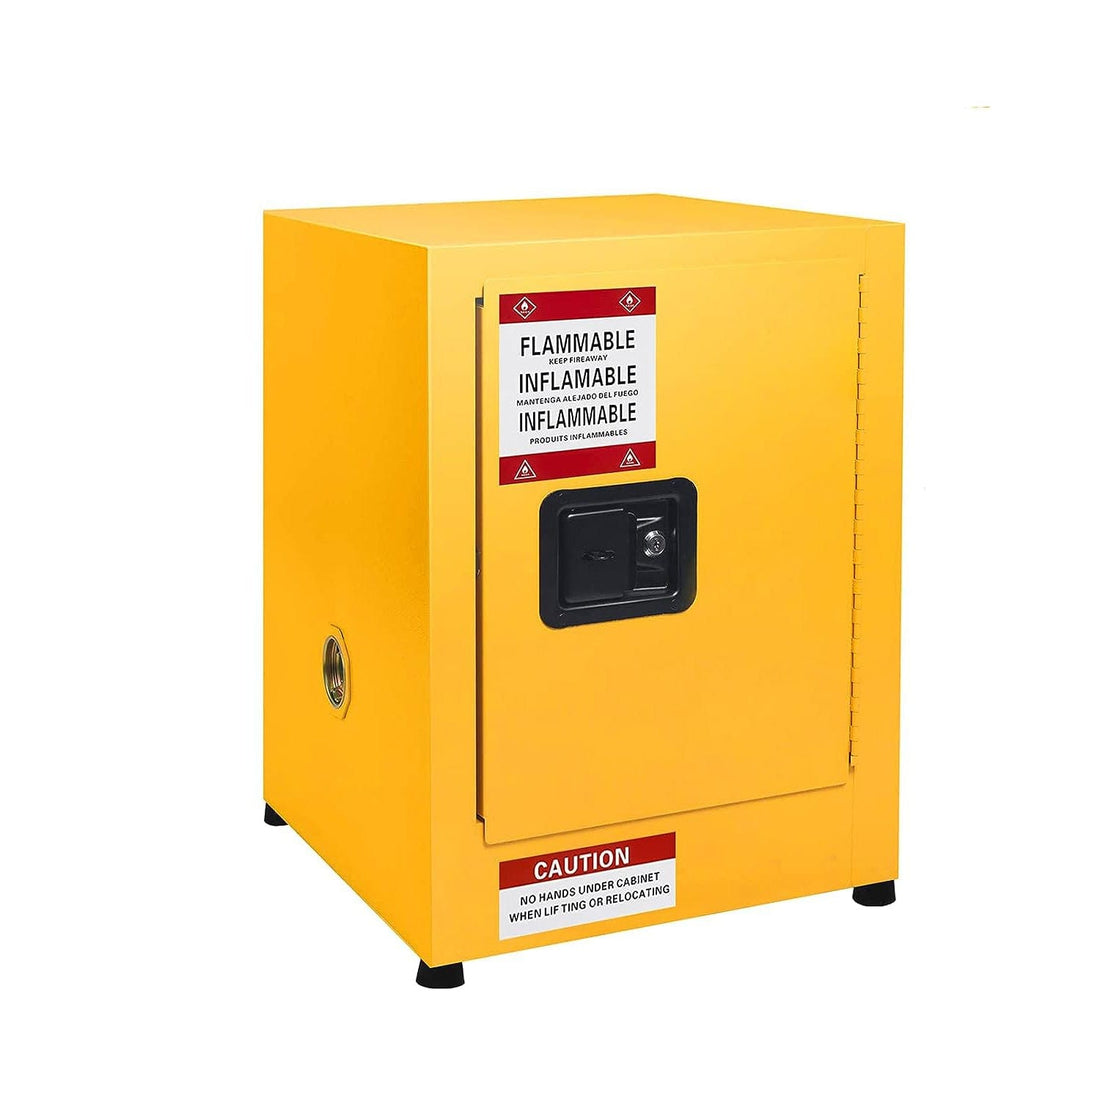 17x17x22 Inches Galvanized Steel Safety Cabinet Flammable Liquids Storage Cabinet Yellow